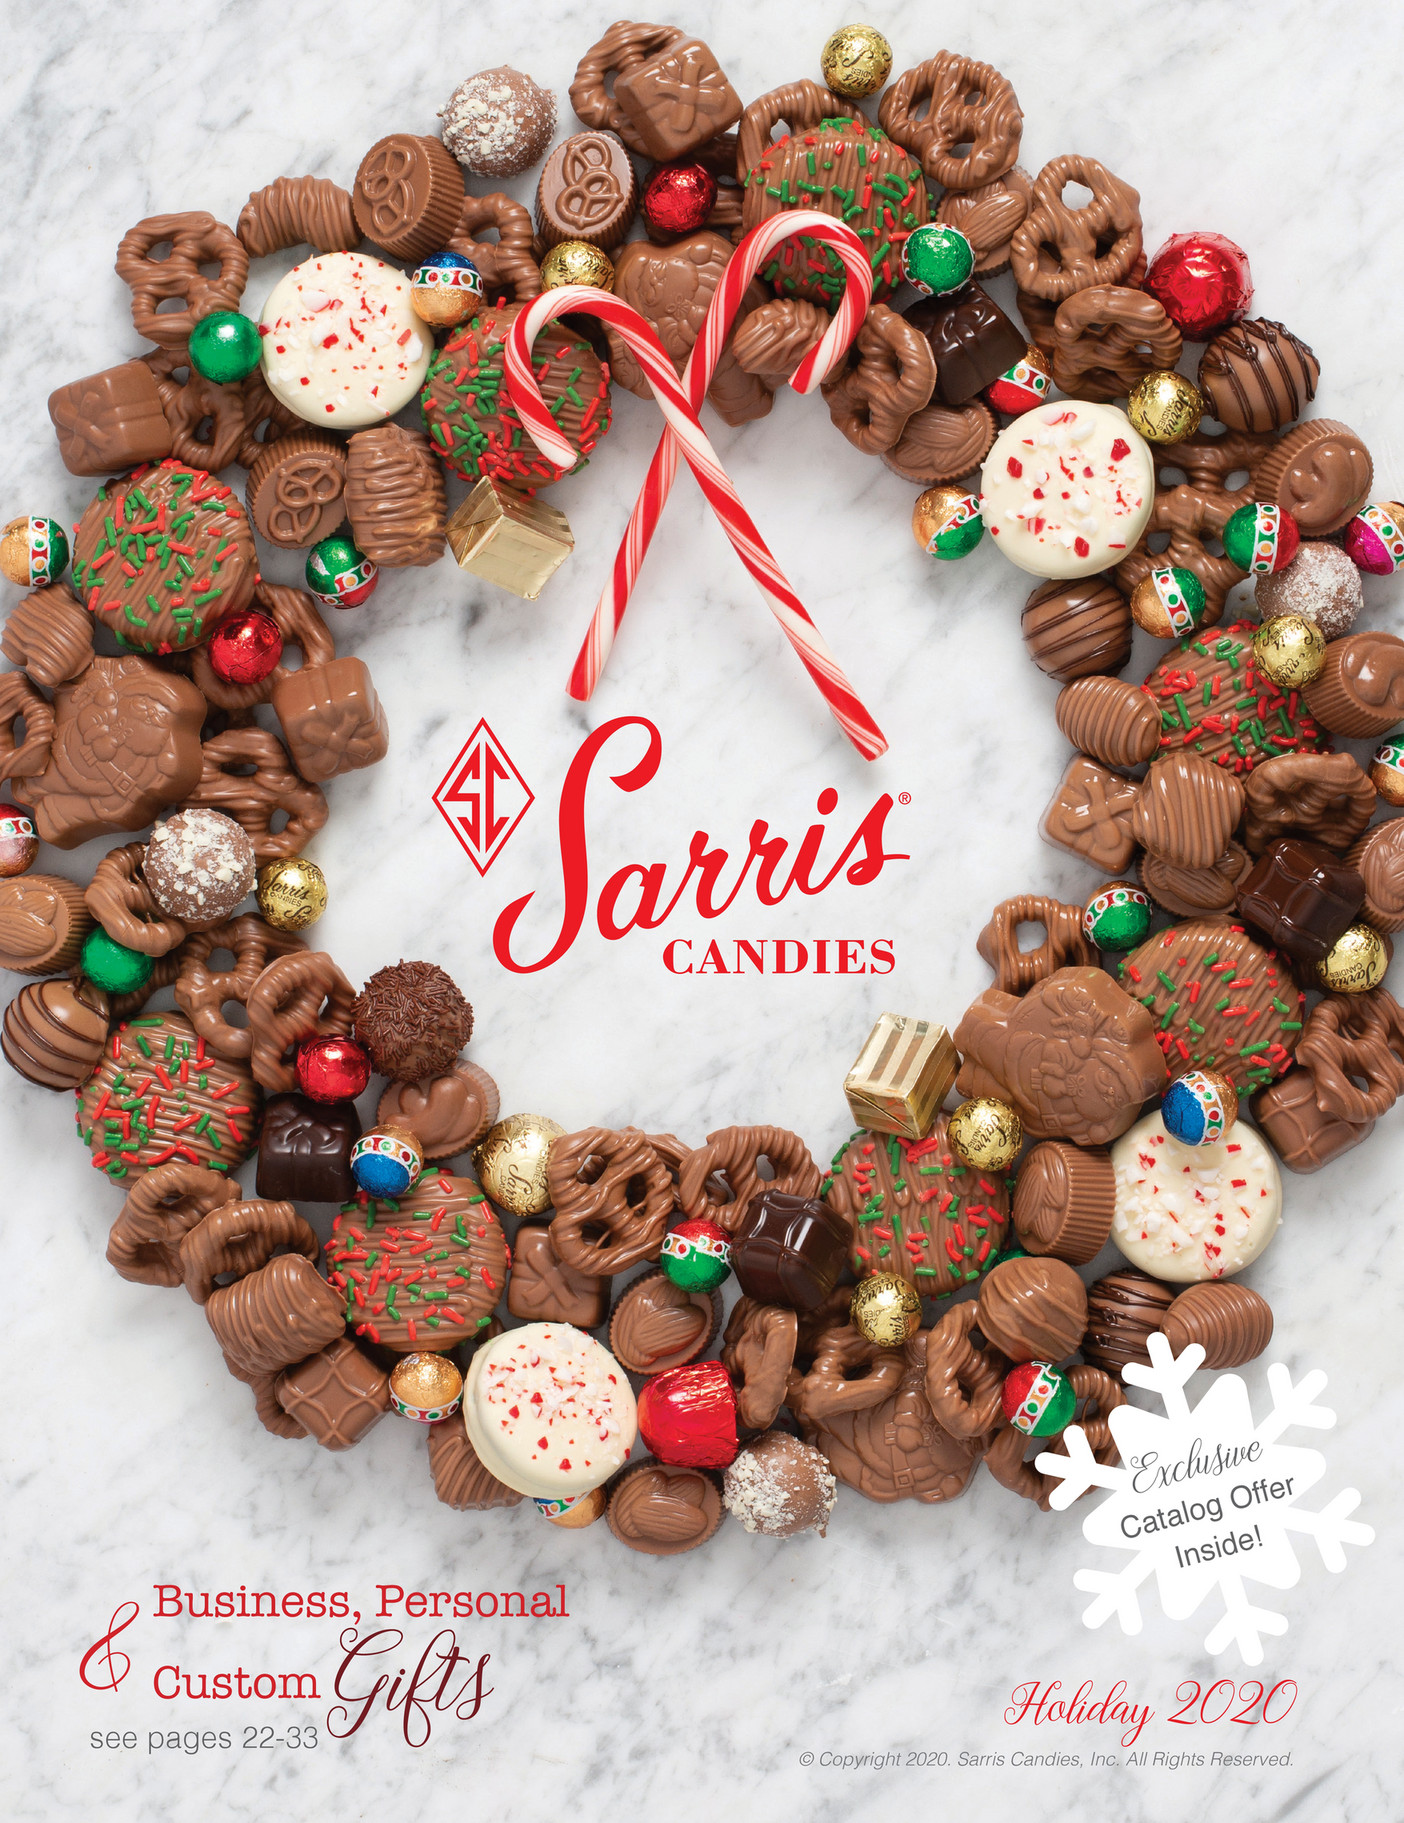 Sarris Candies Holiday 2020 Page 1